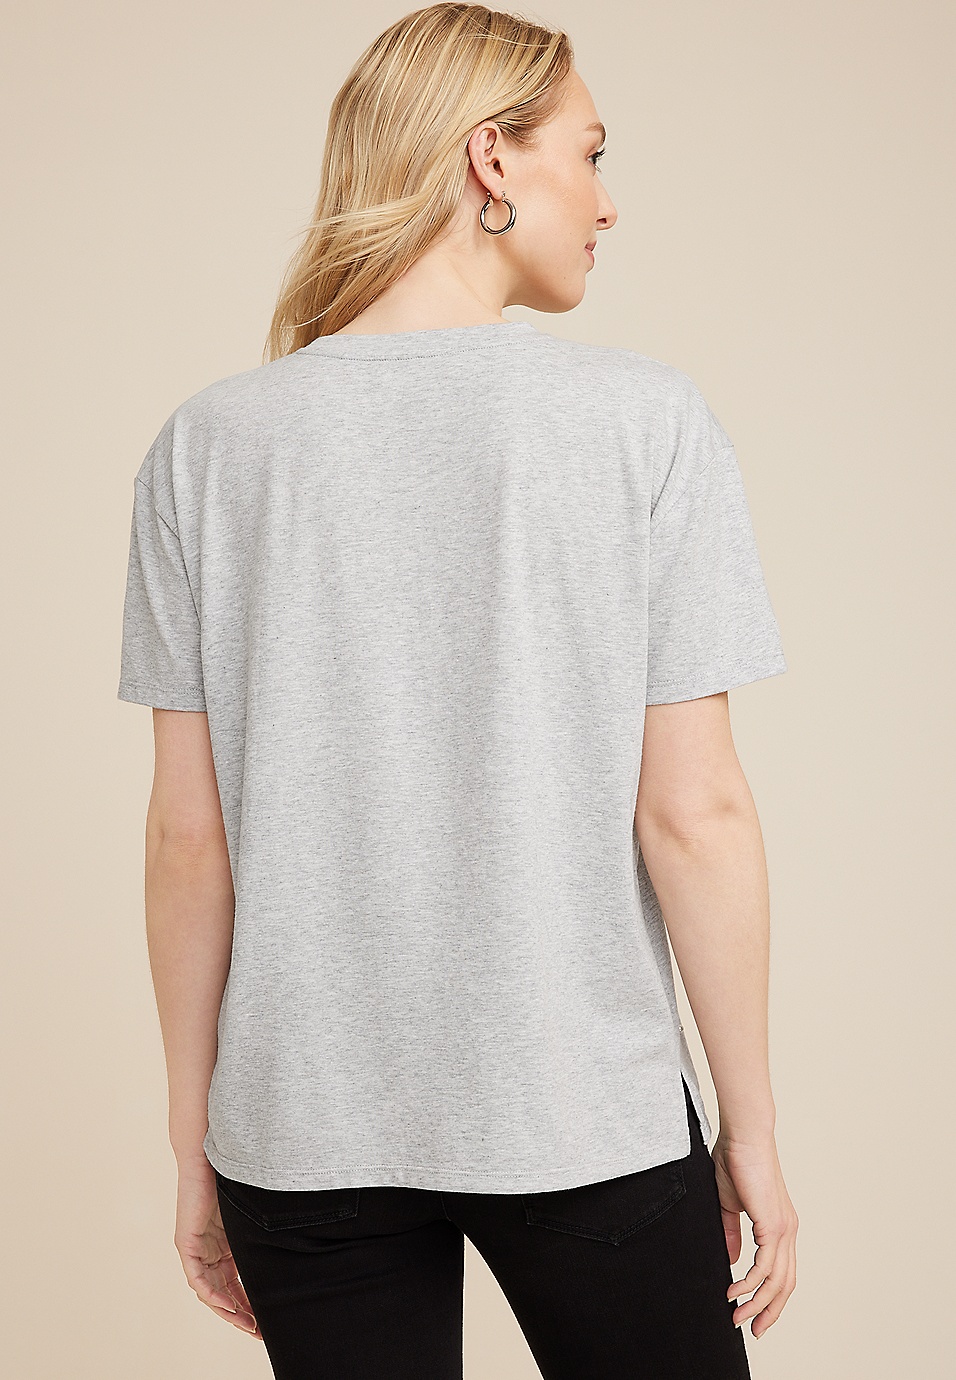 edgely™ Pearl Embellished Crew Neck Tee | maurices